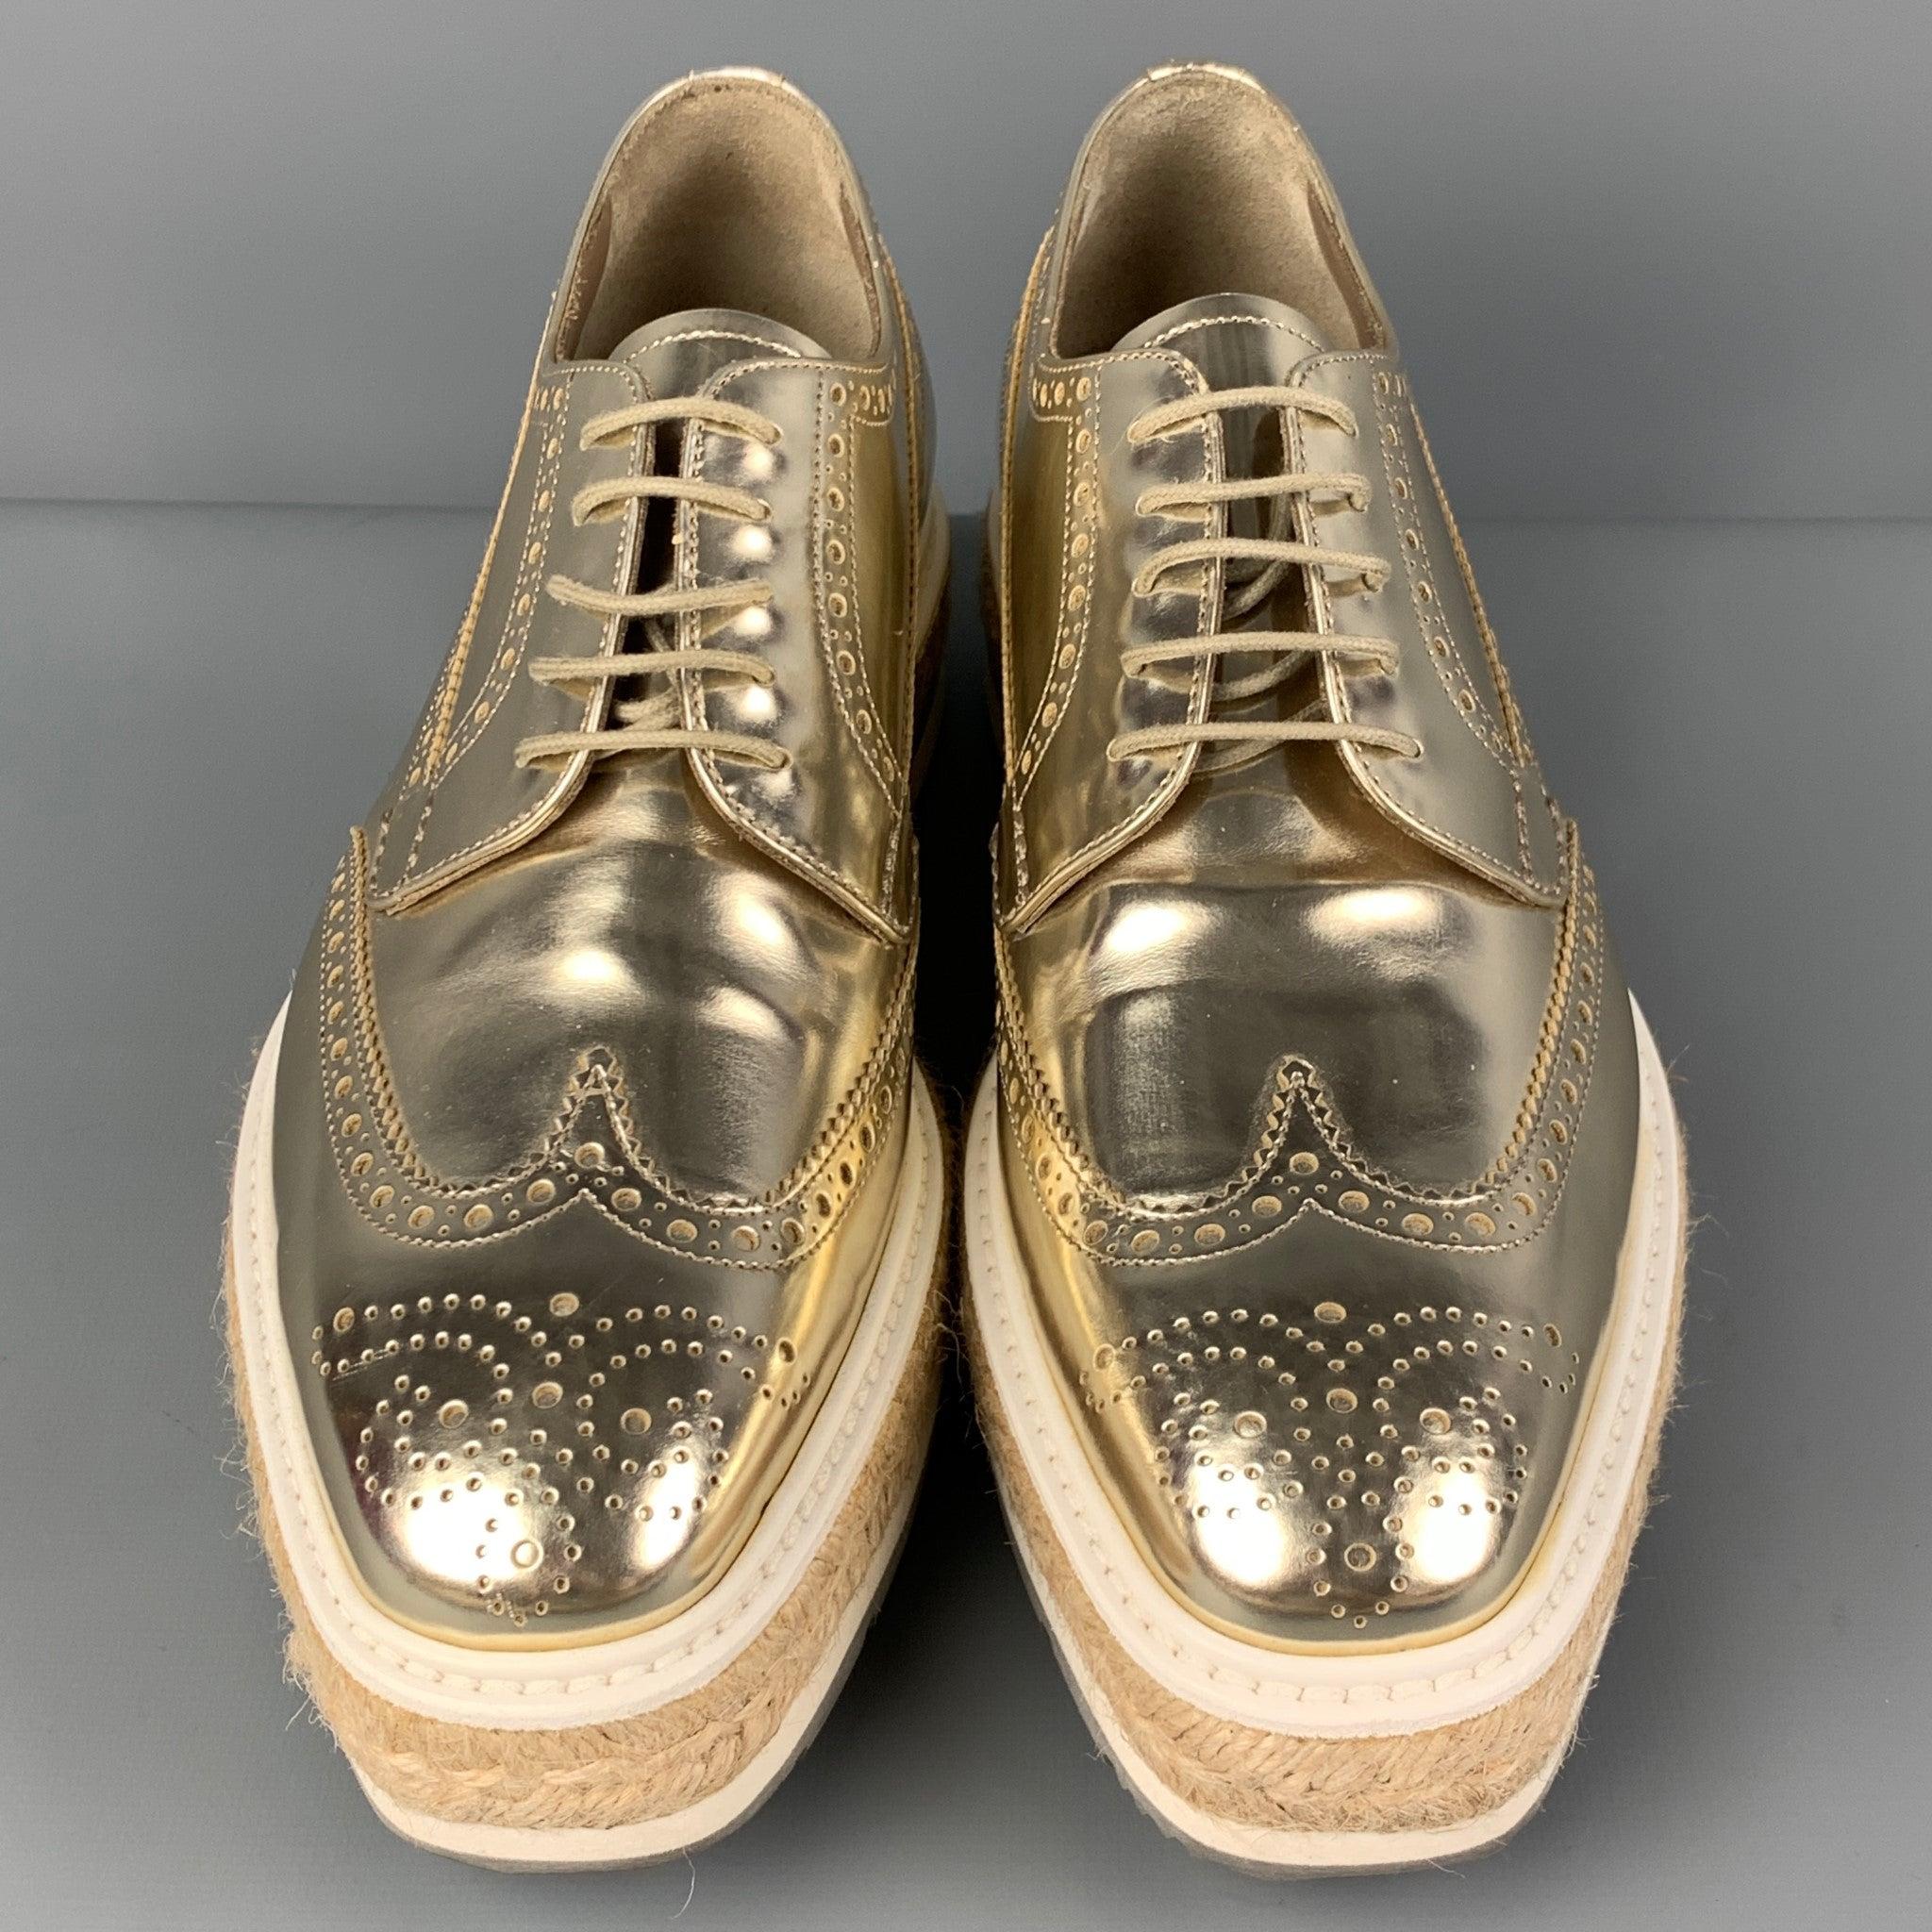 Men's PRADA Size 6.5 Gold Leather Perforated Wingtip Lace Up Shoes For Sale